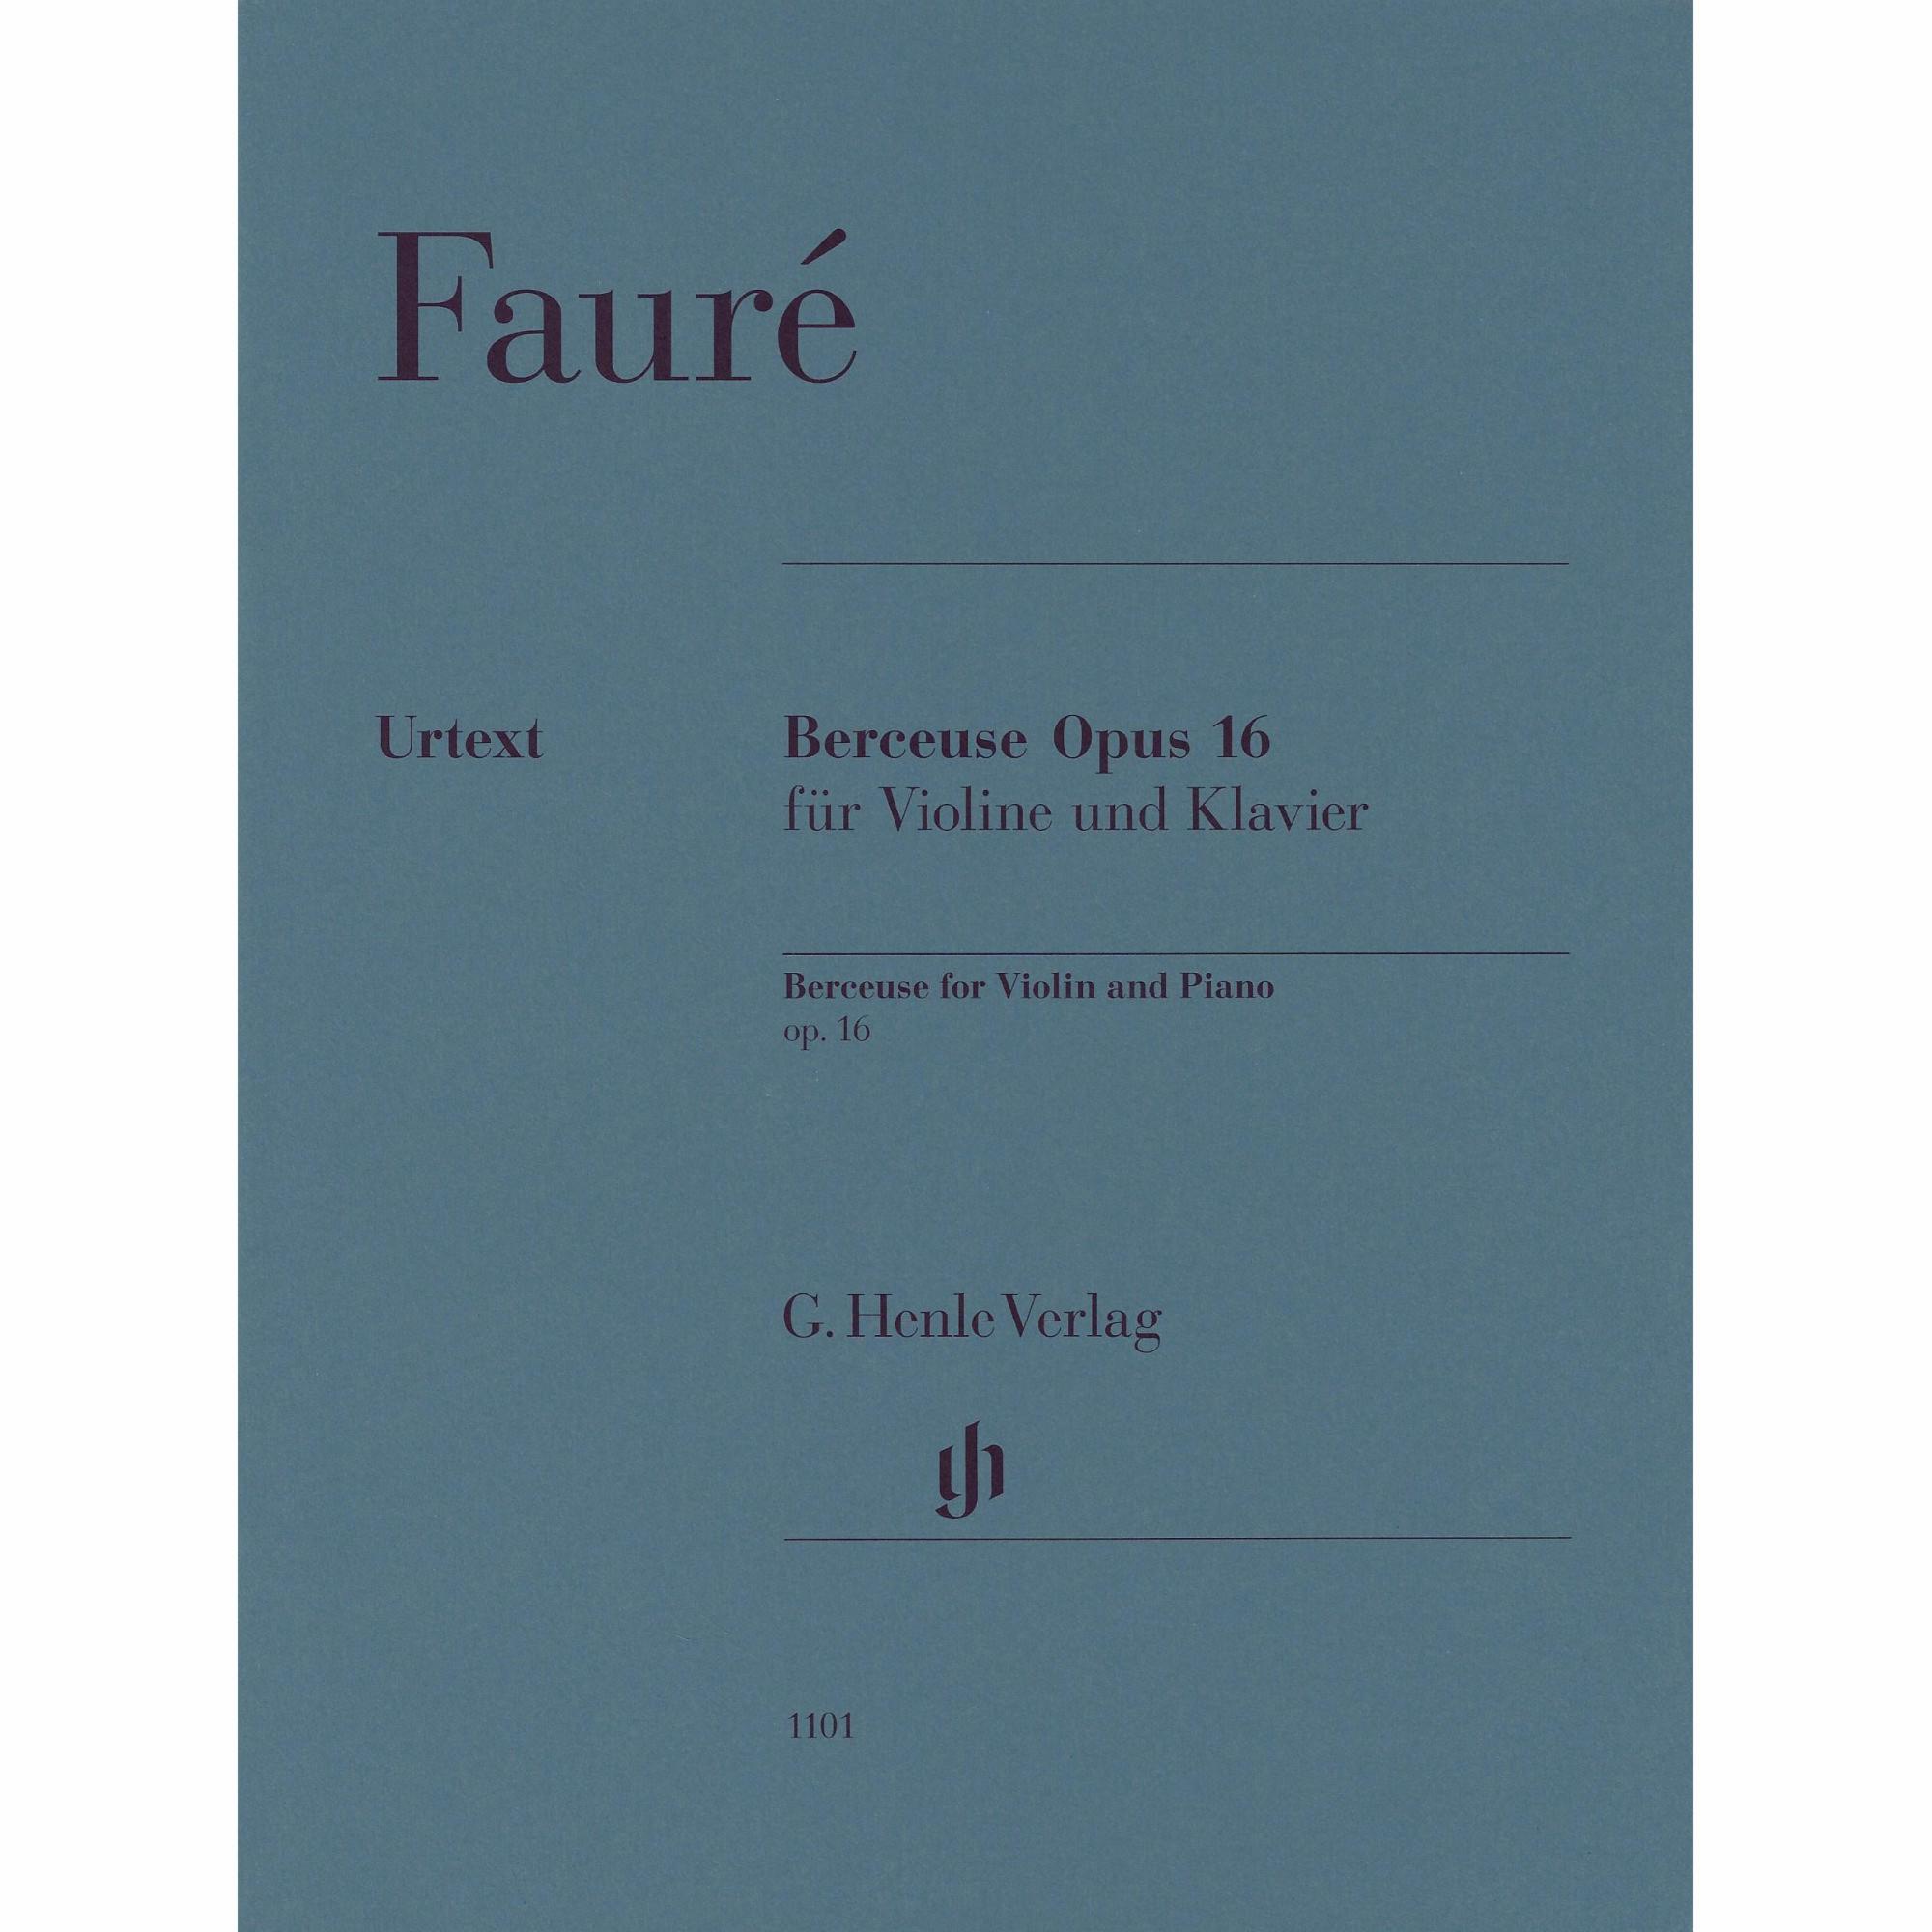 Faure -- Berceuse, Op. 16 for Violin and Piano